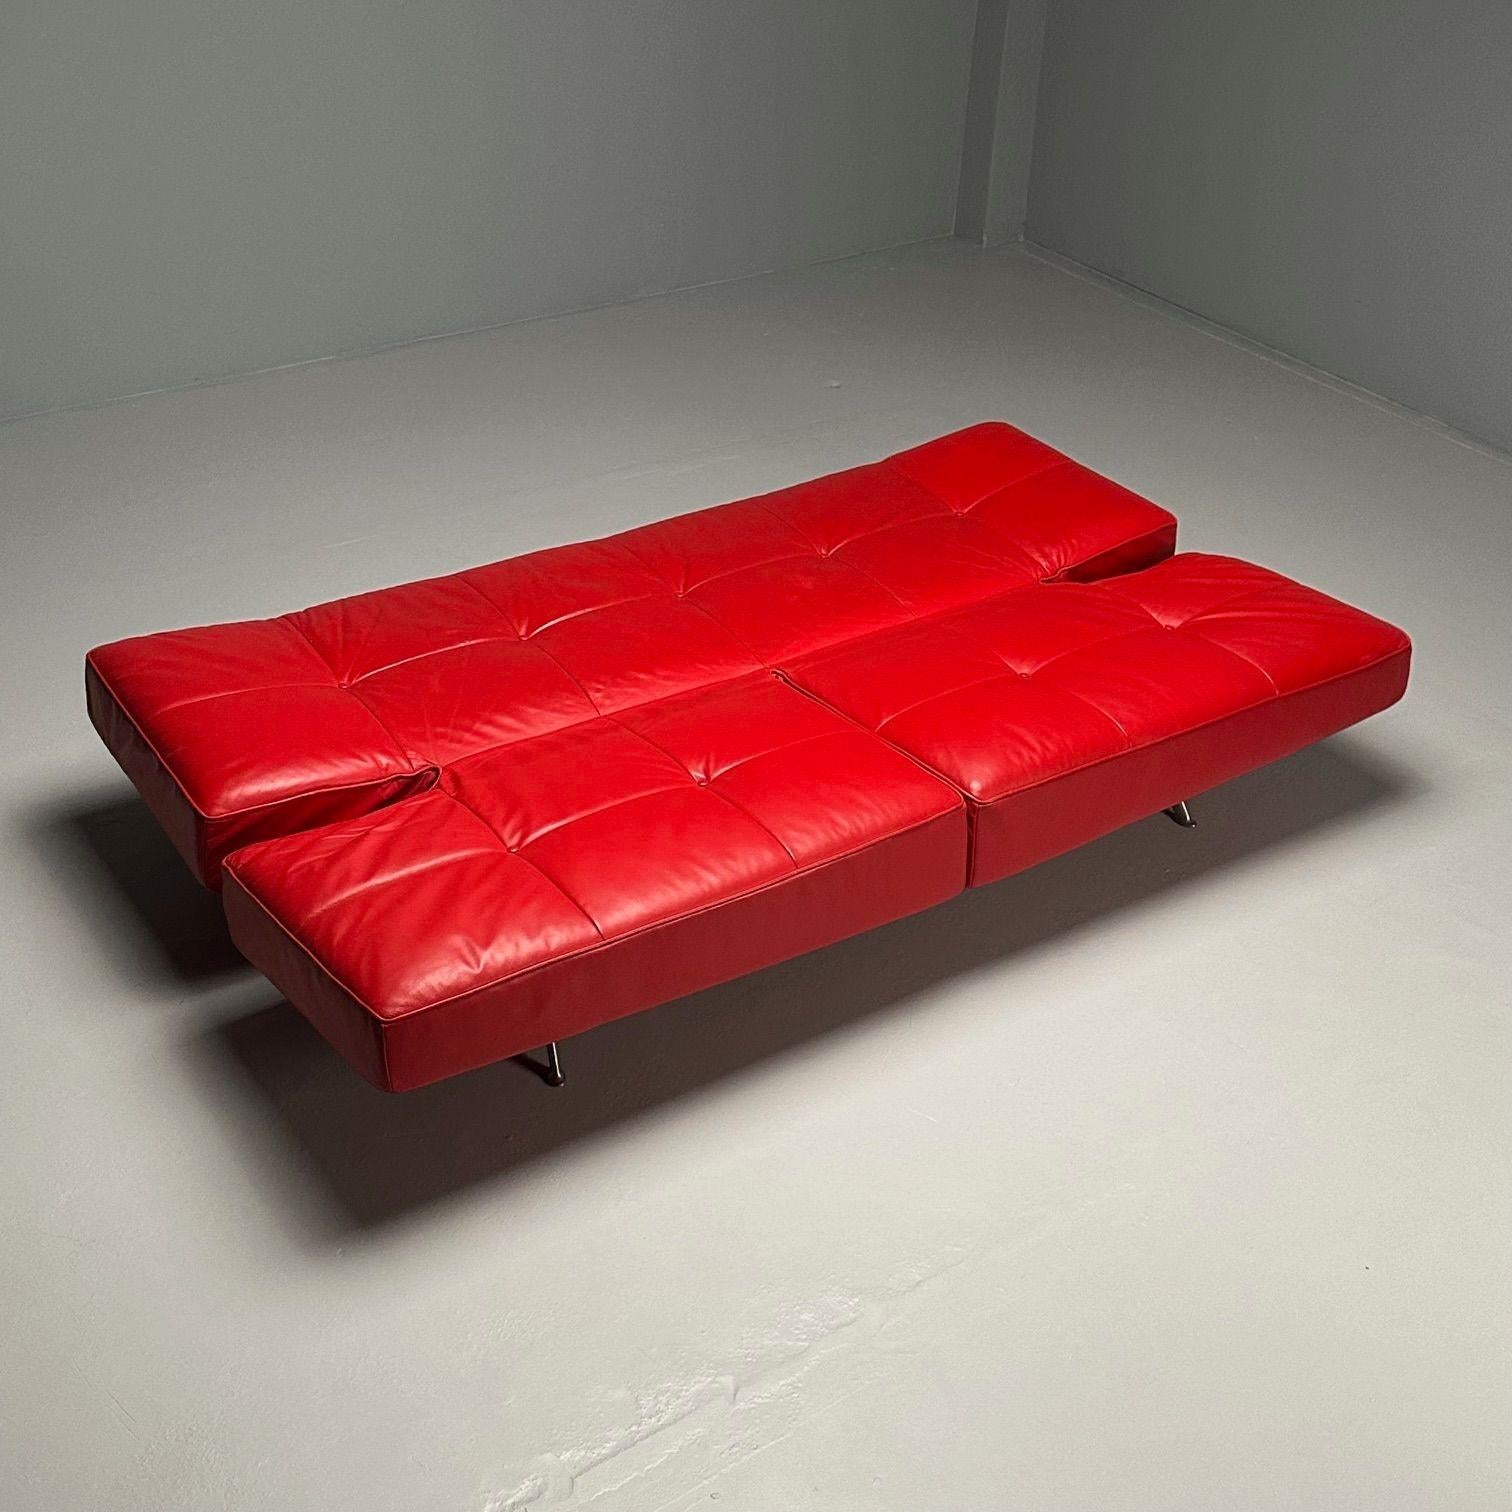 Pascal Mourgue, Ligne Roset, Smala Adjustable Daybed, Sofa, Red Leather, France 2